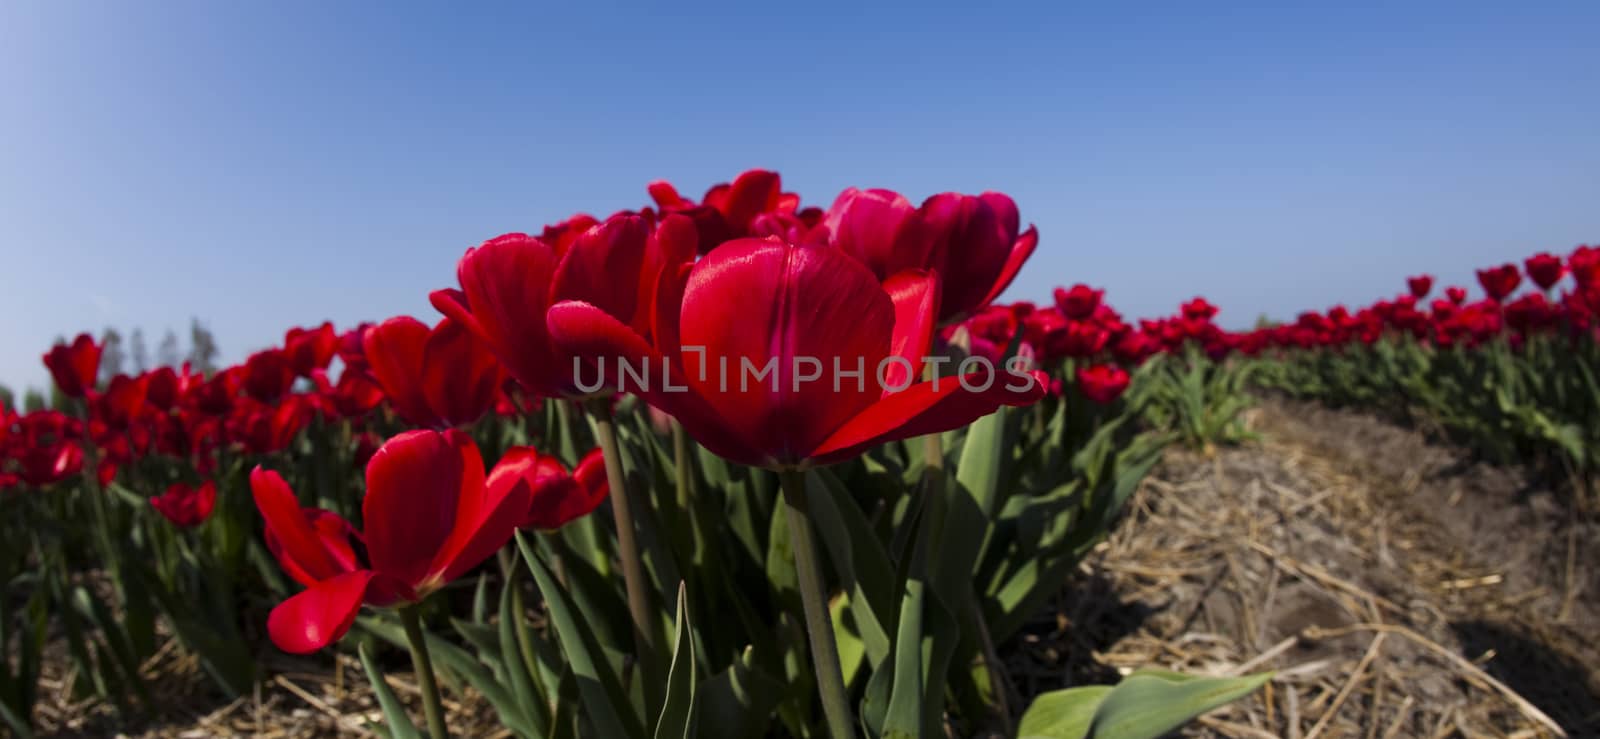 Flowers are blooming on the field, tulips by JanPietruszka